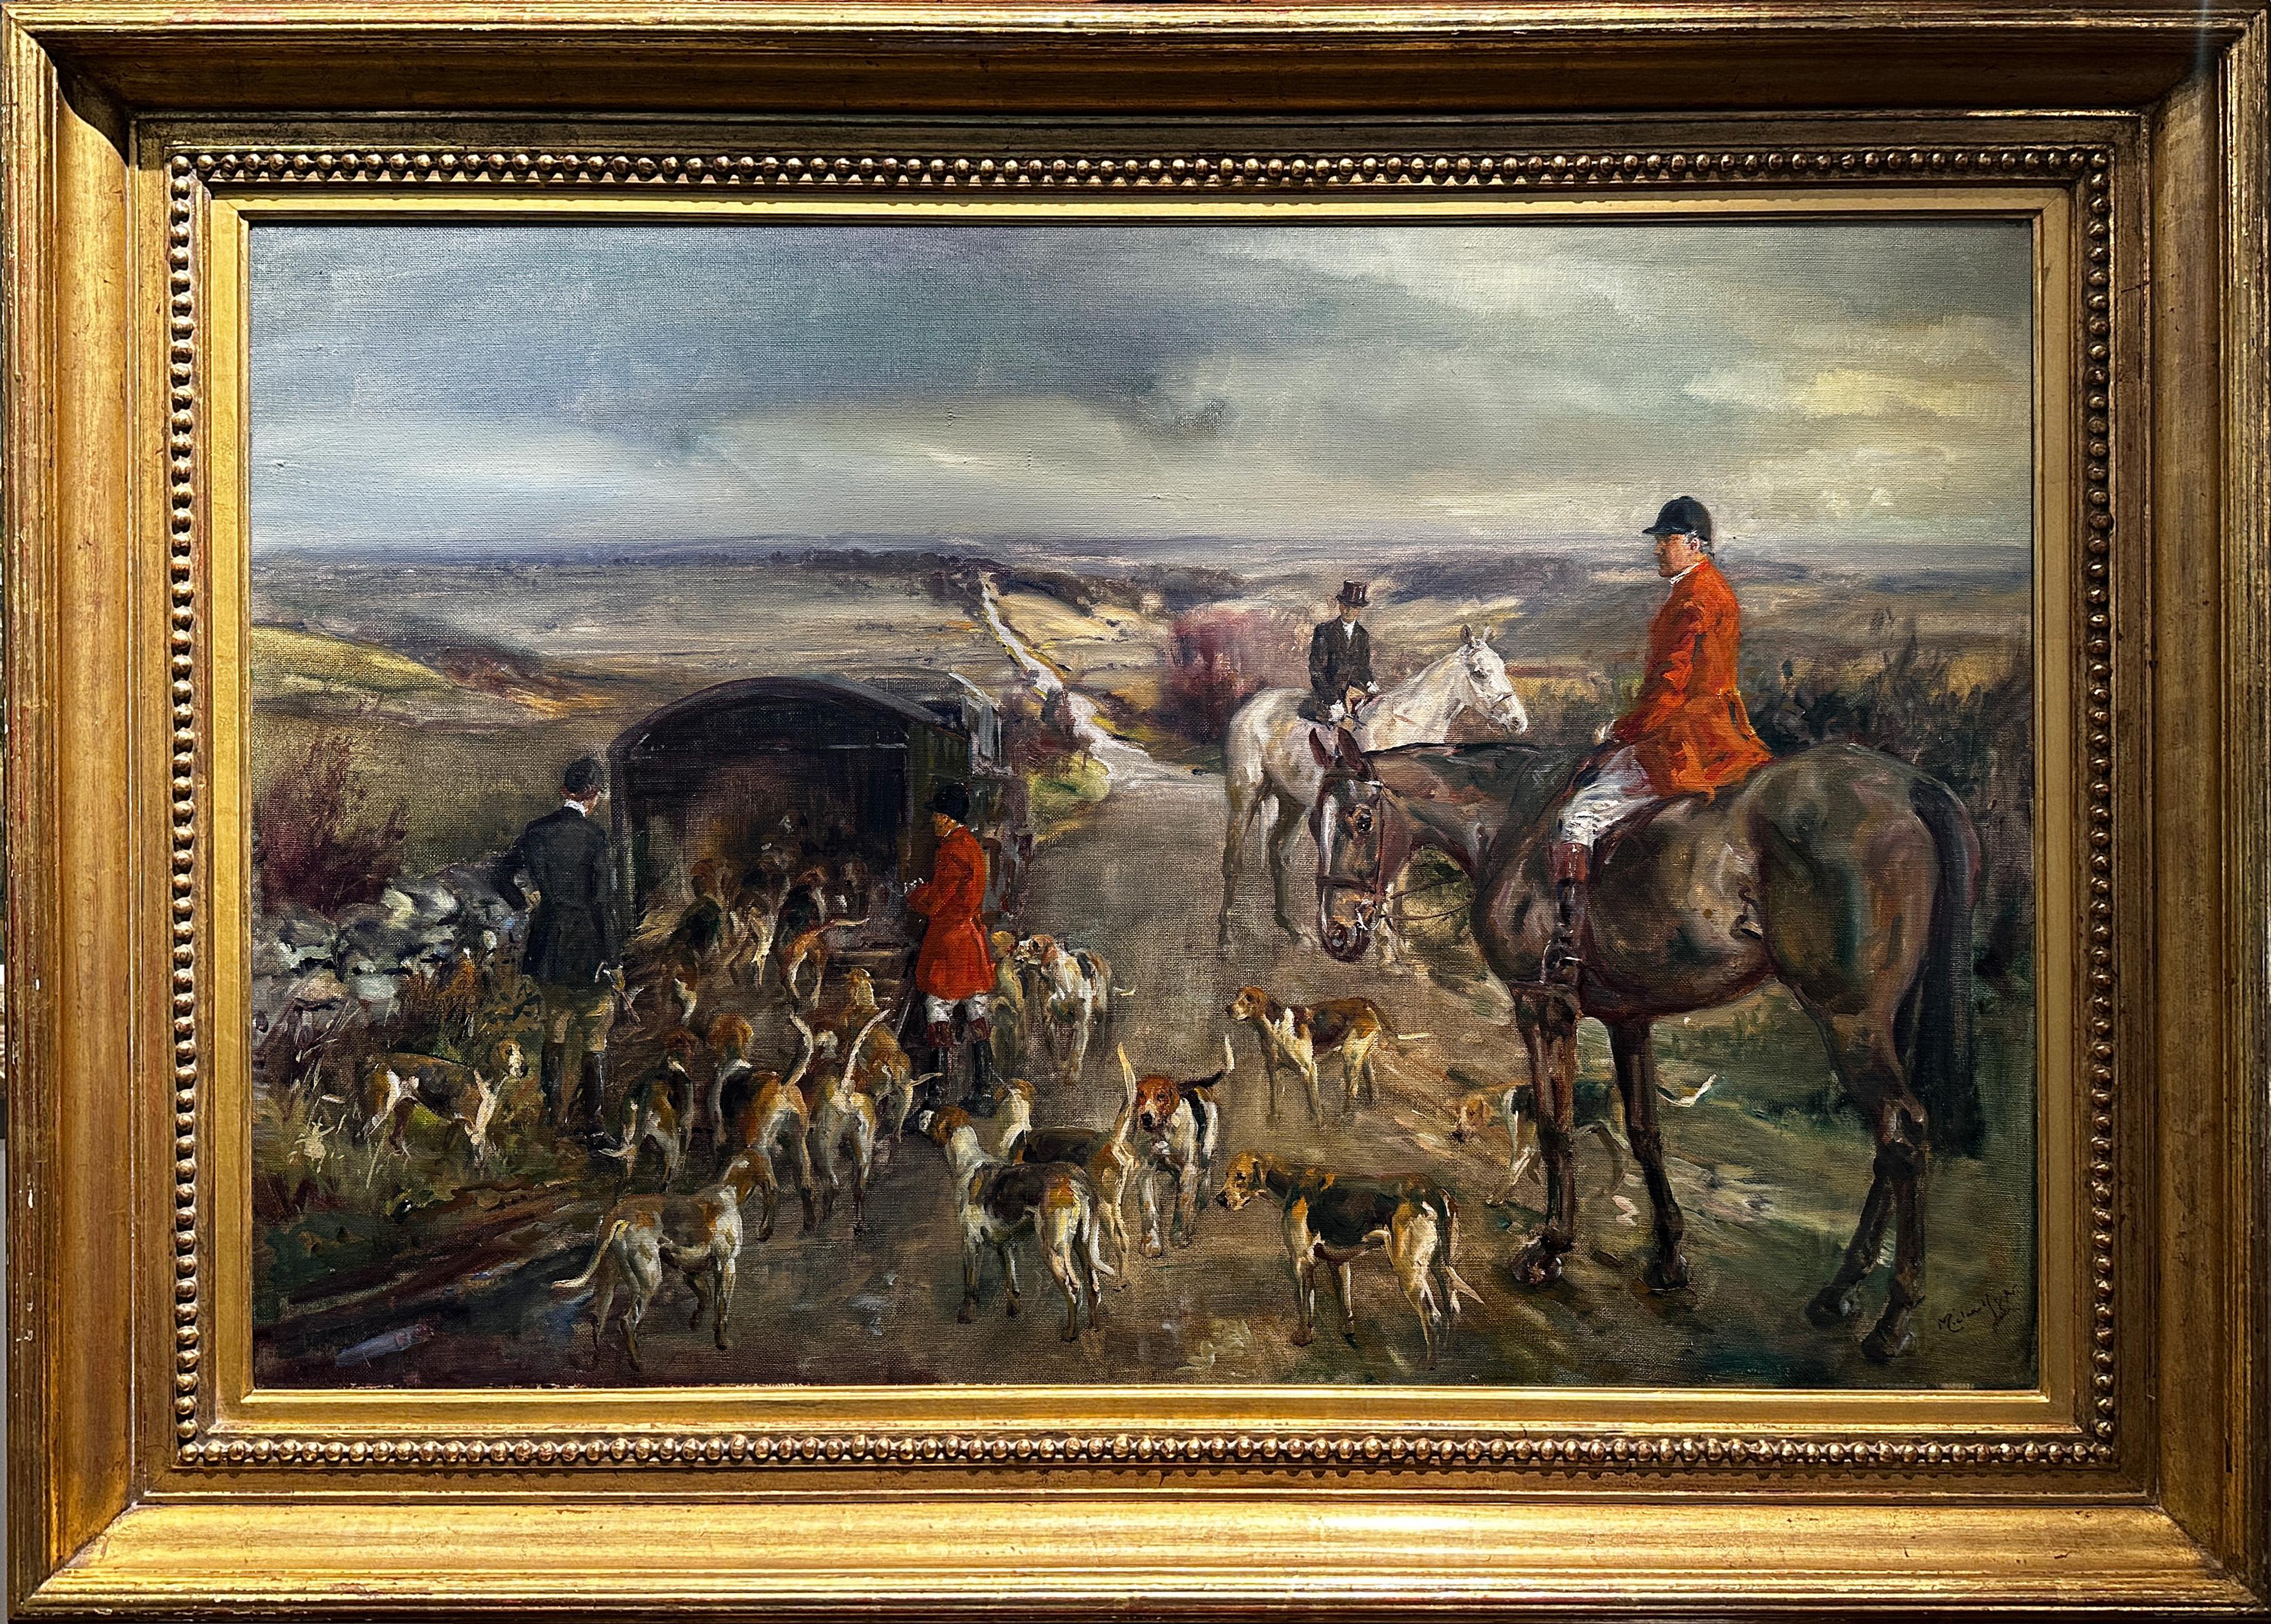 Michael Lyne Landscape Painting - 'Mendip Hunt' English Countryside painting of horses, hounds and huntsmen, red